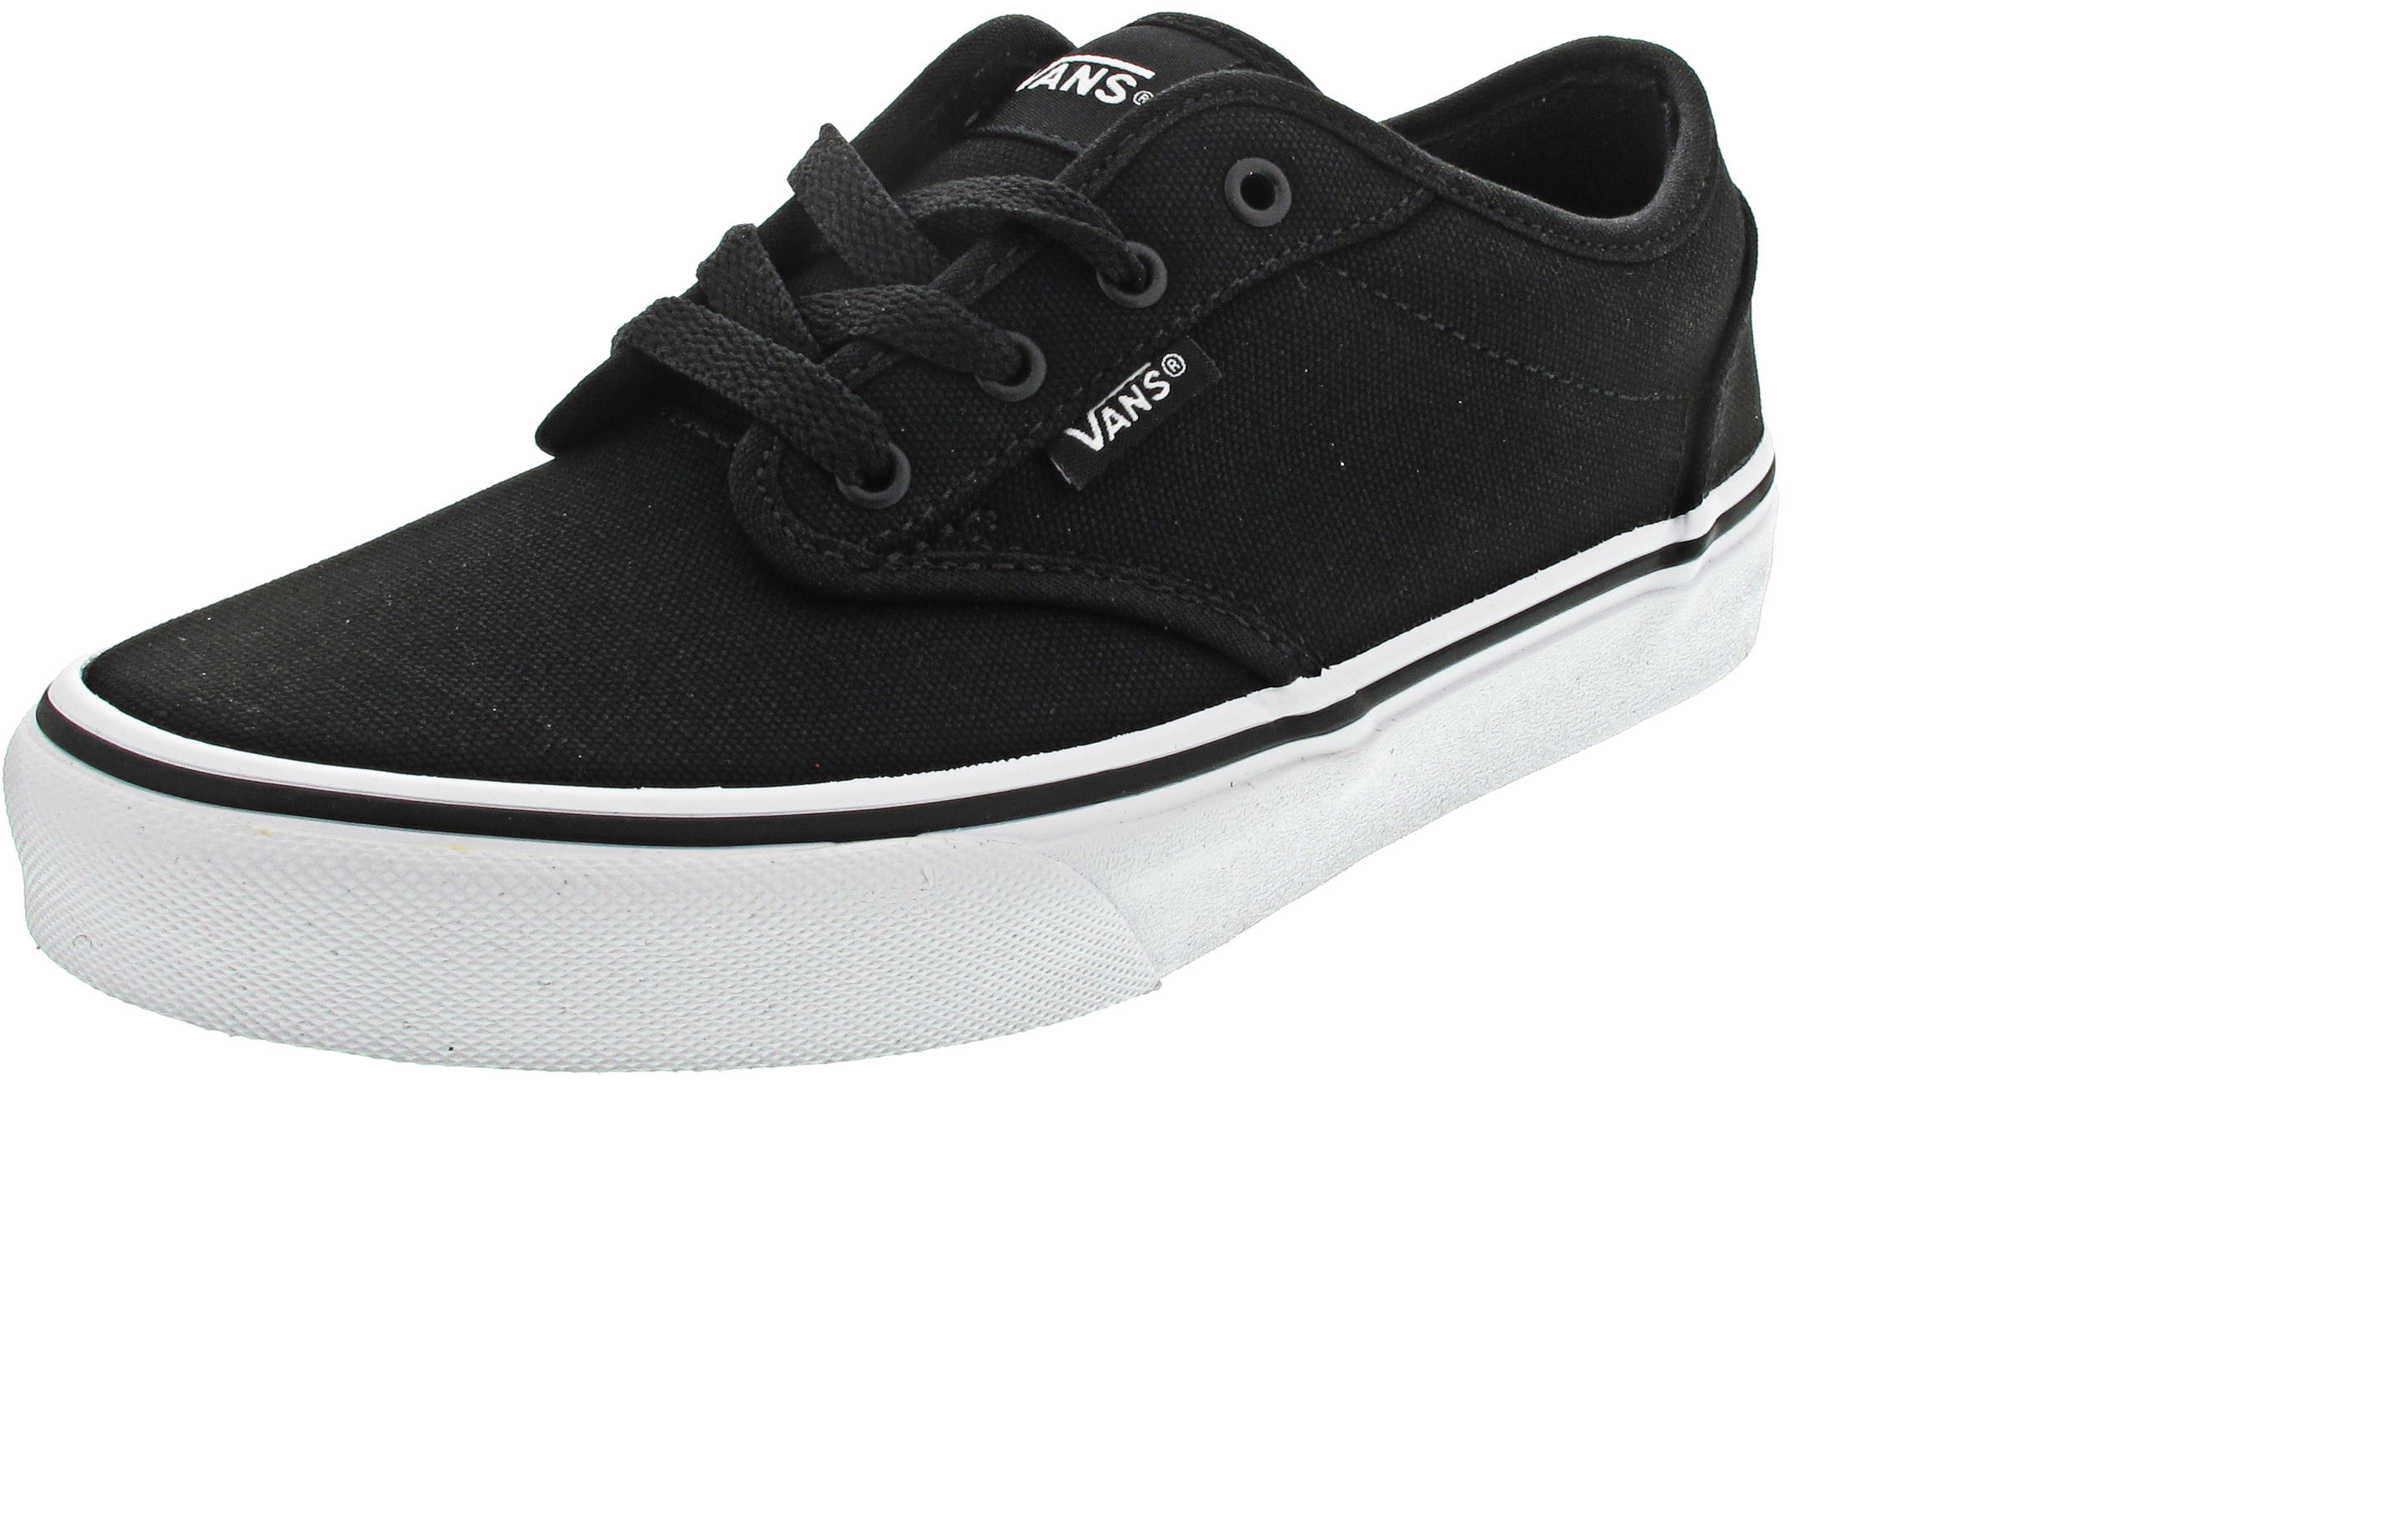 Vans YT Atwood Canvas